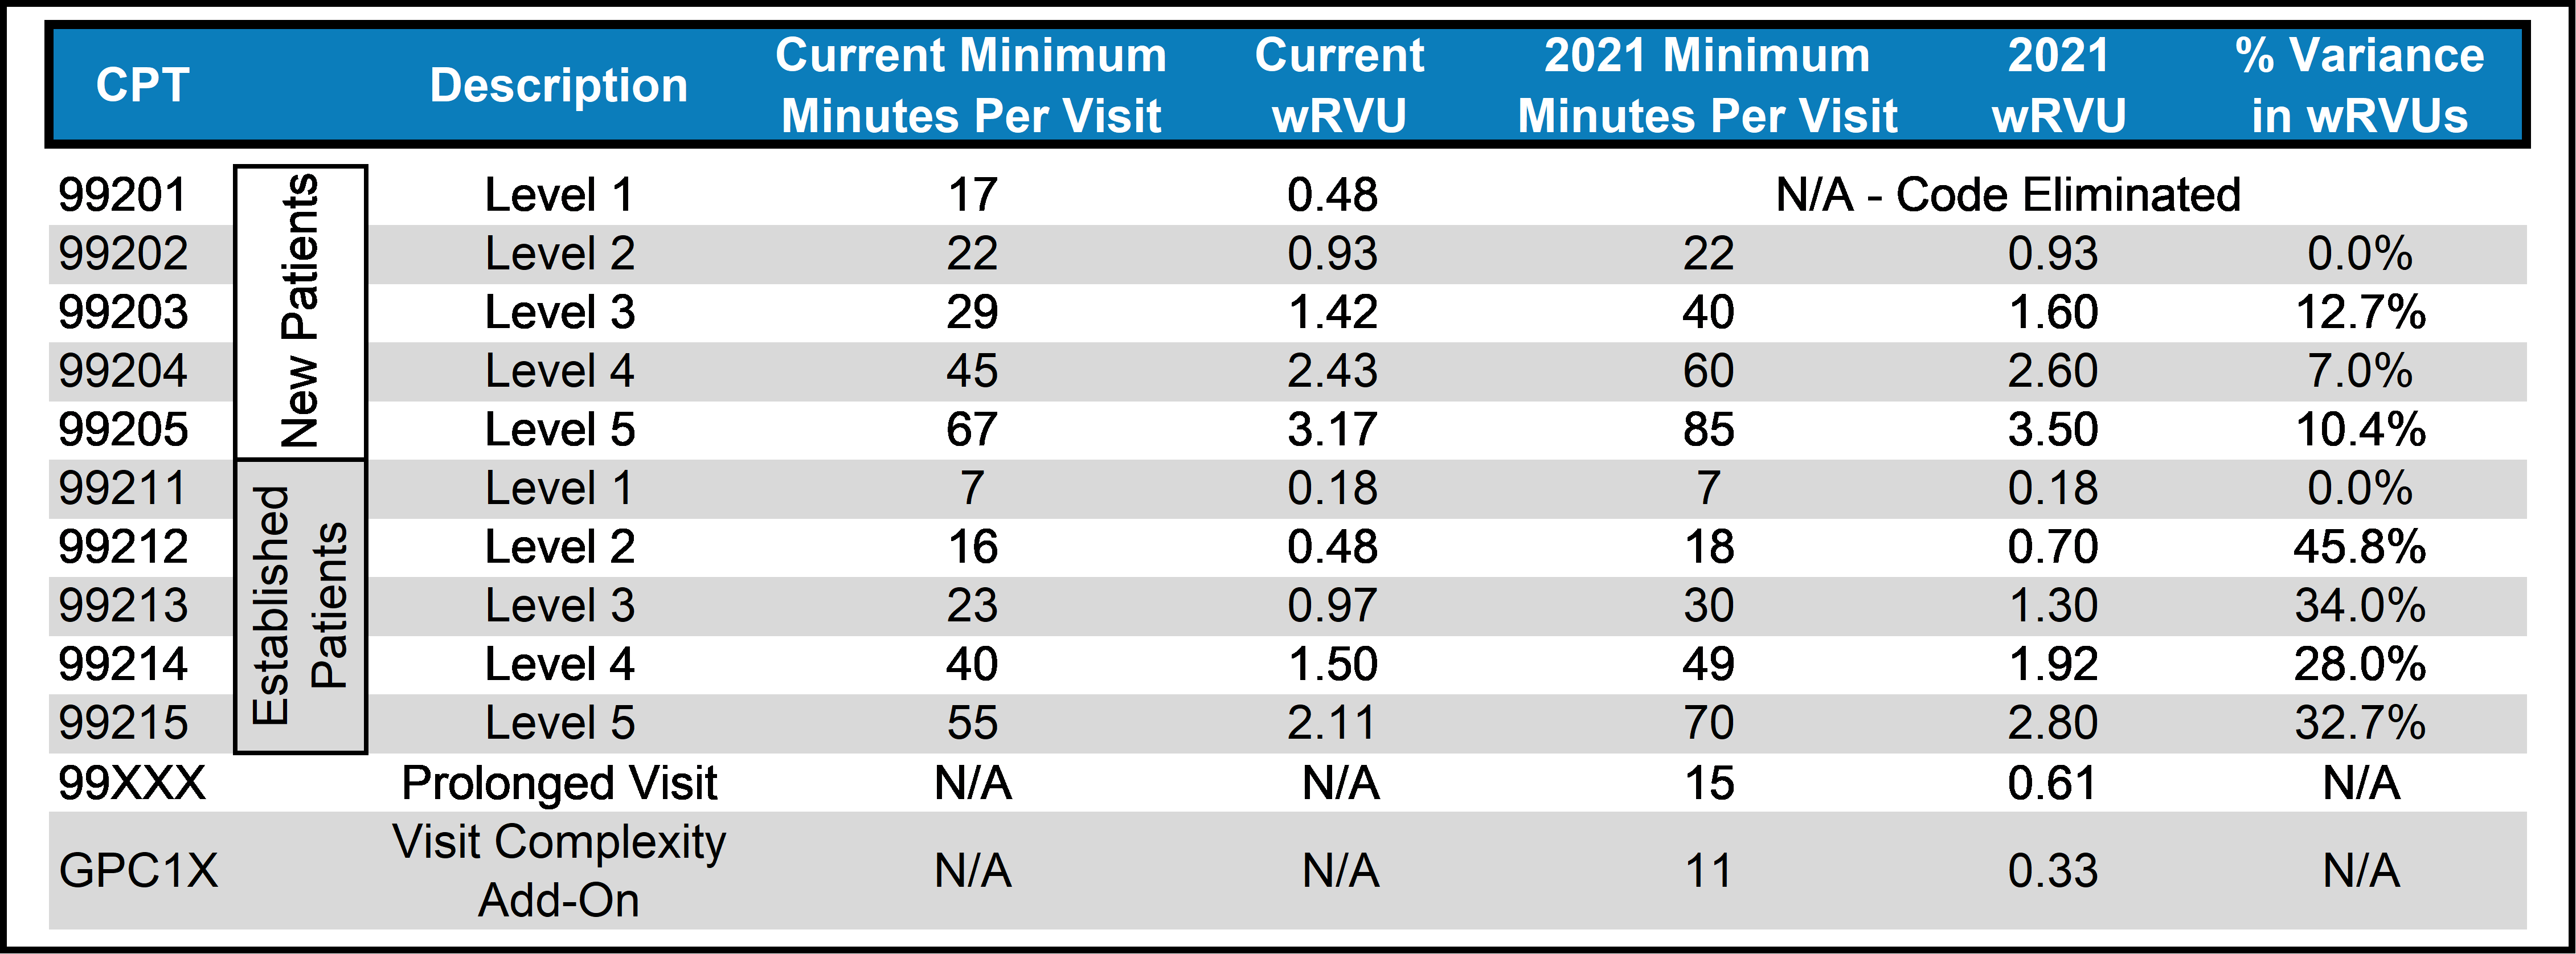 2021 Physician Fee Schedule Changes